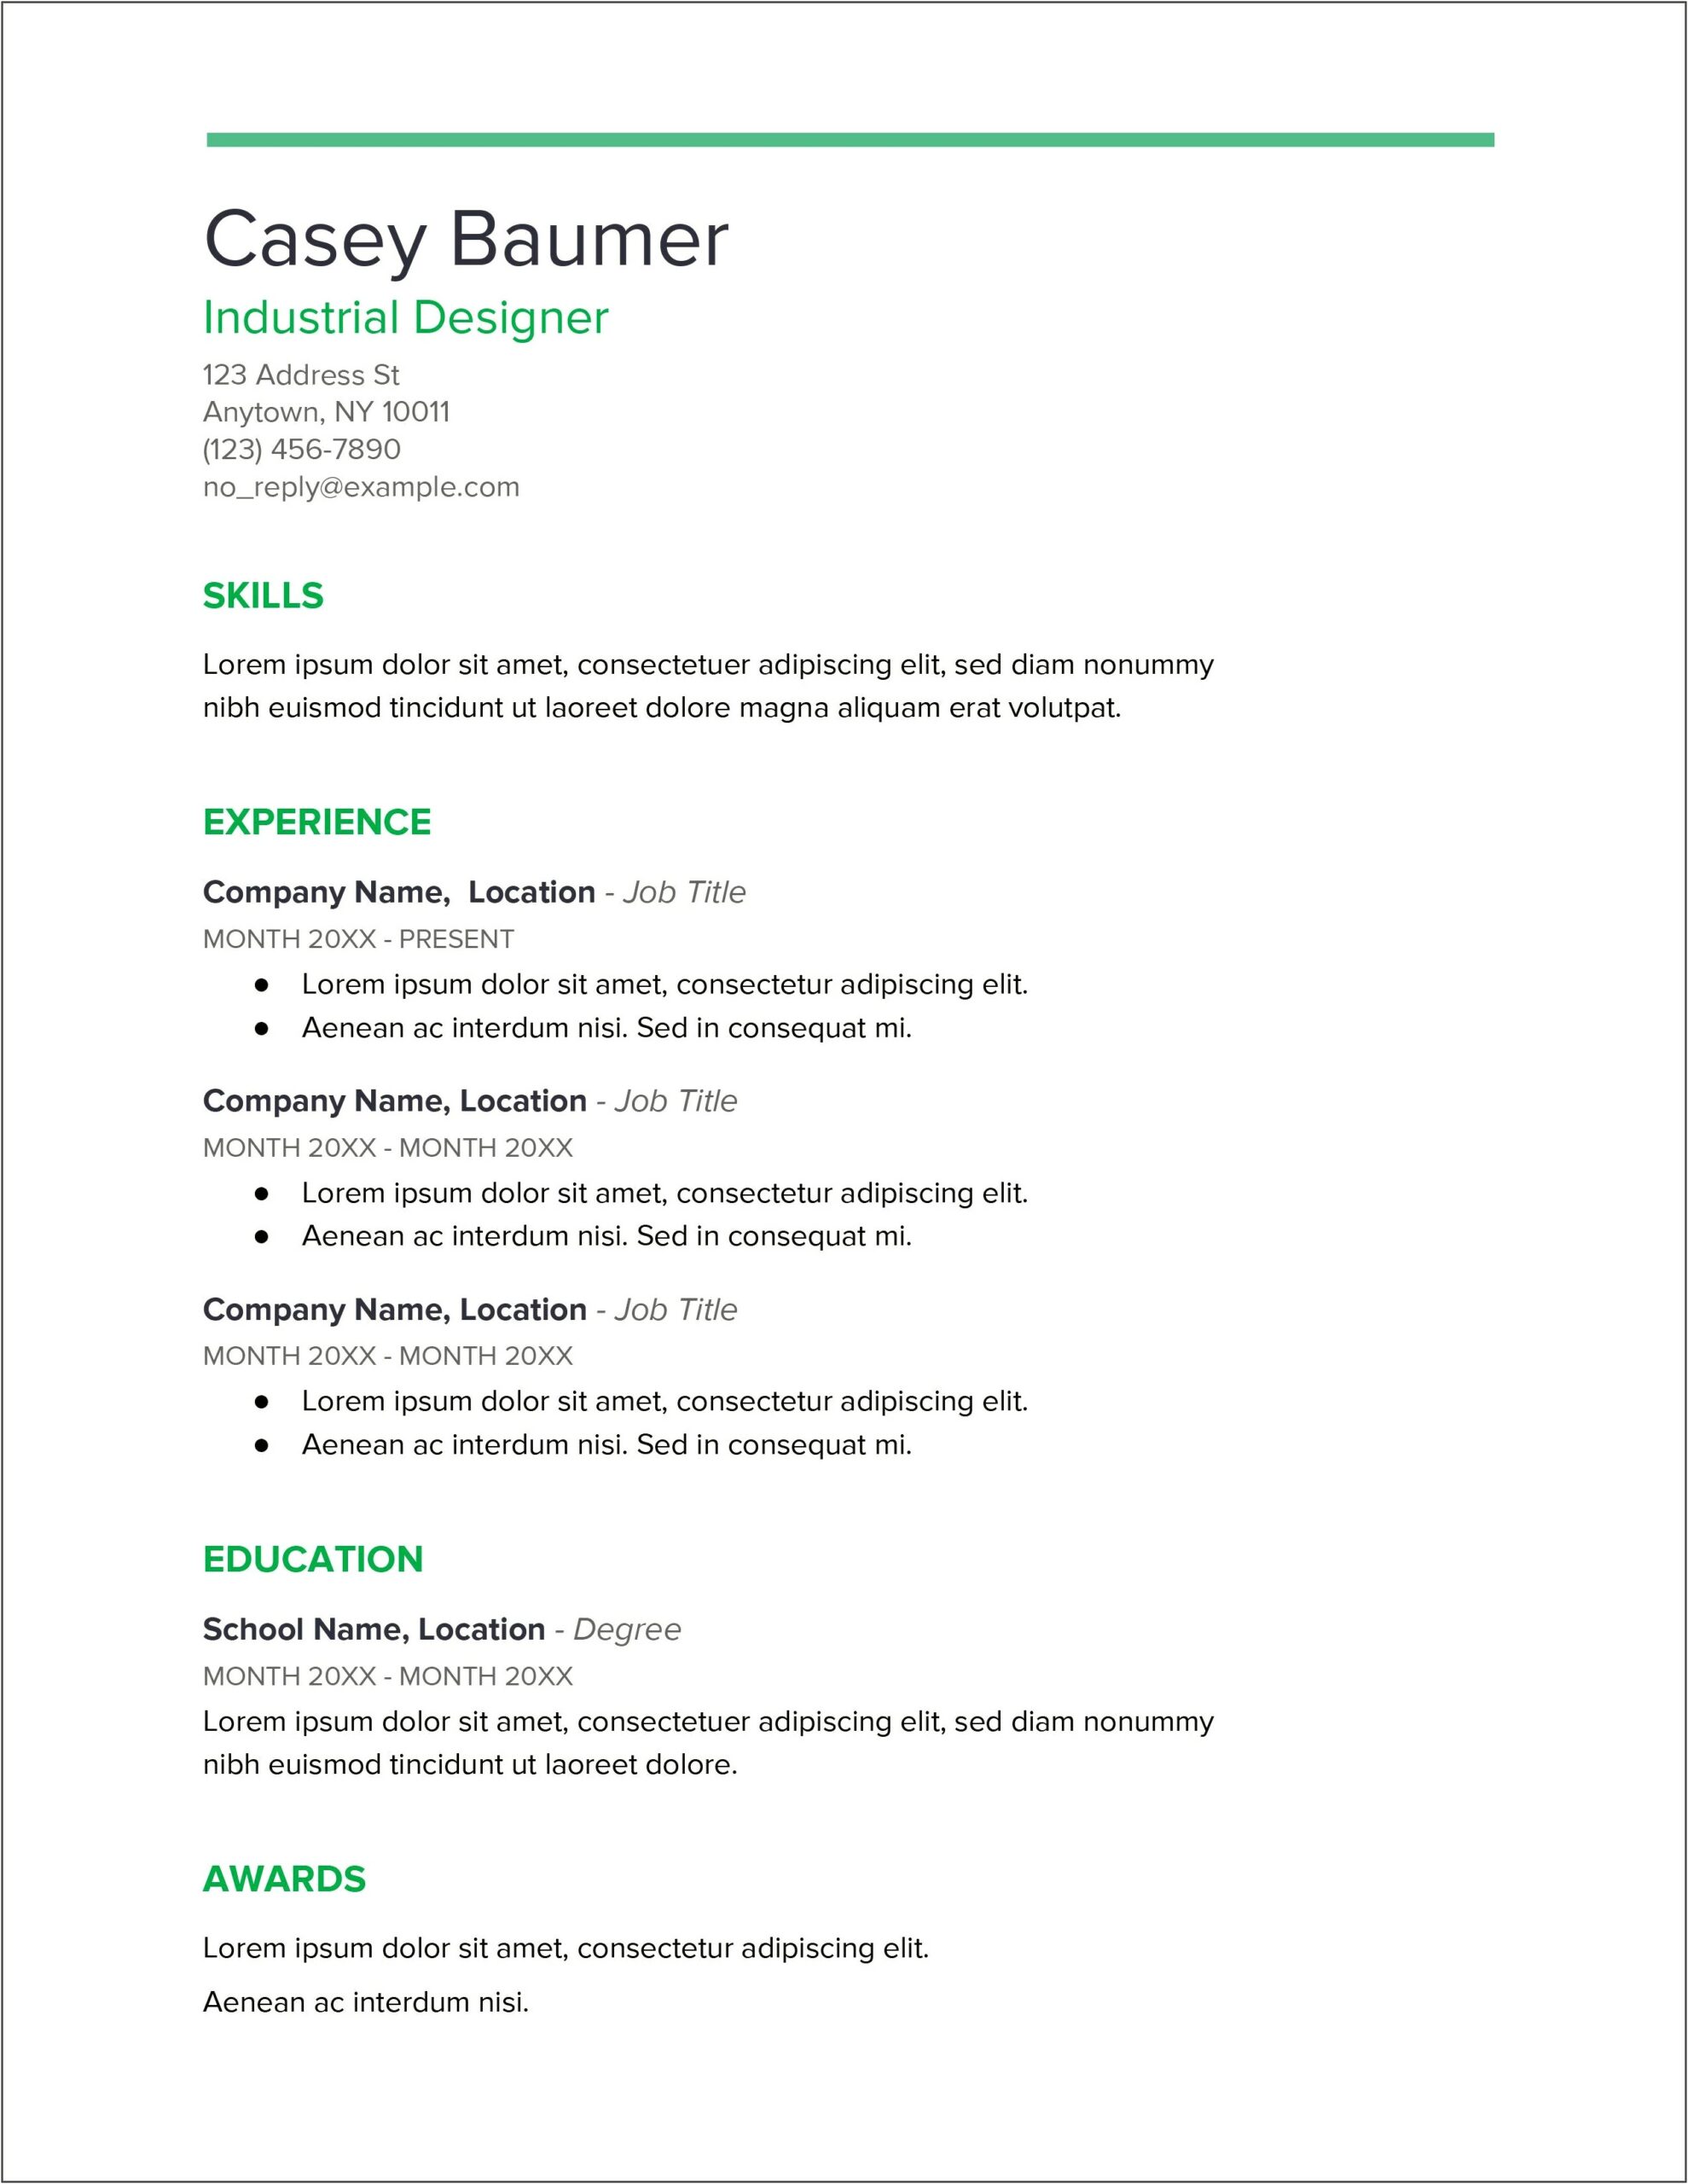 Resume Format For 6 Months Experience